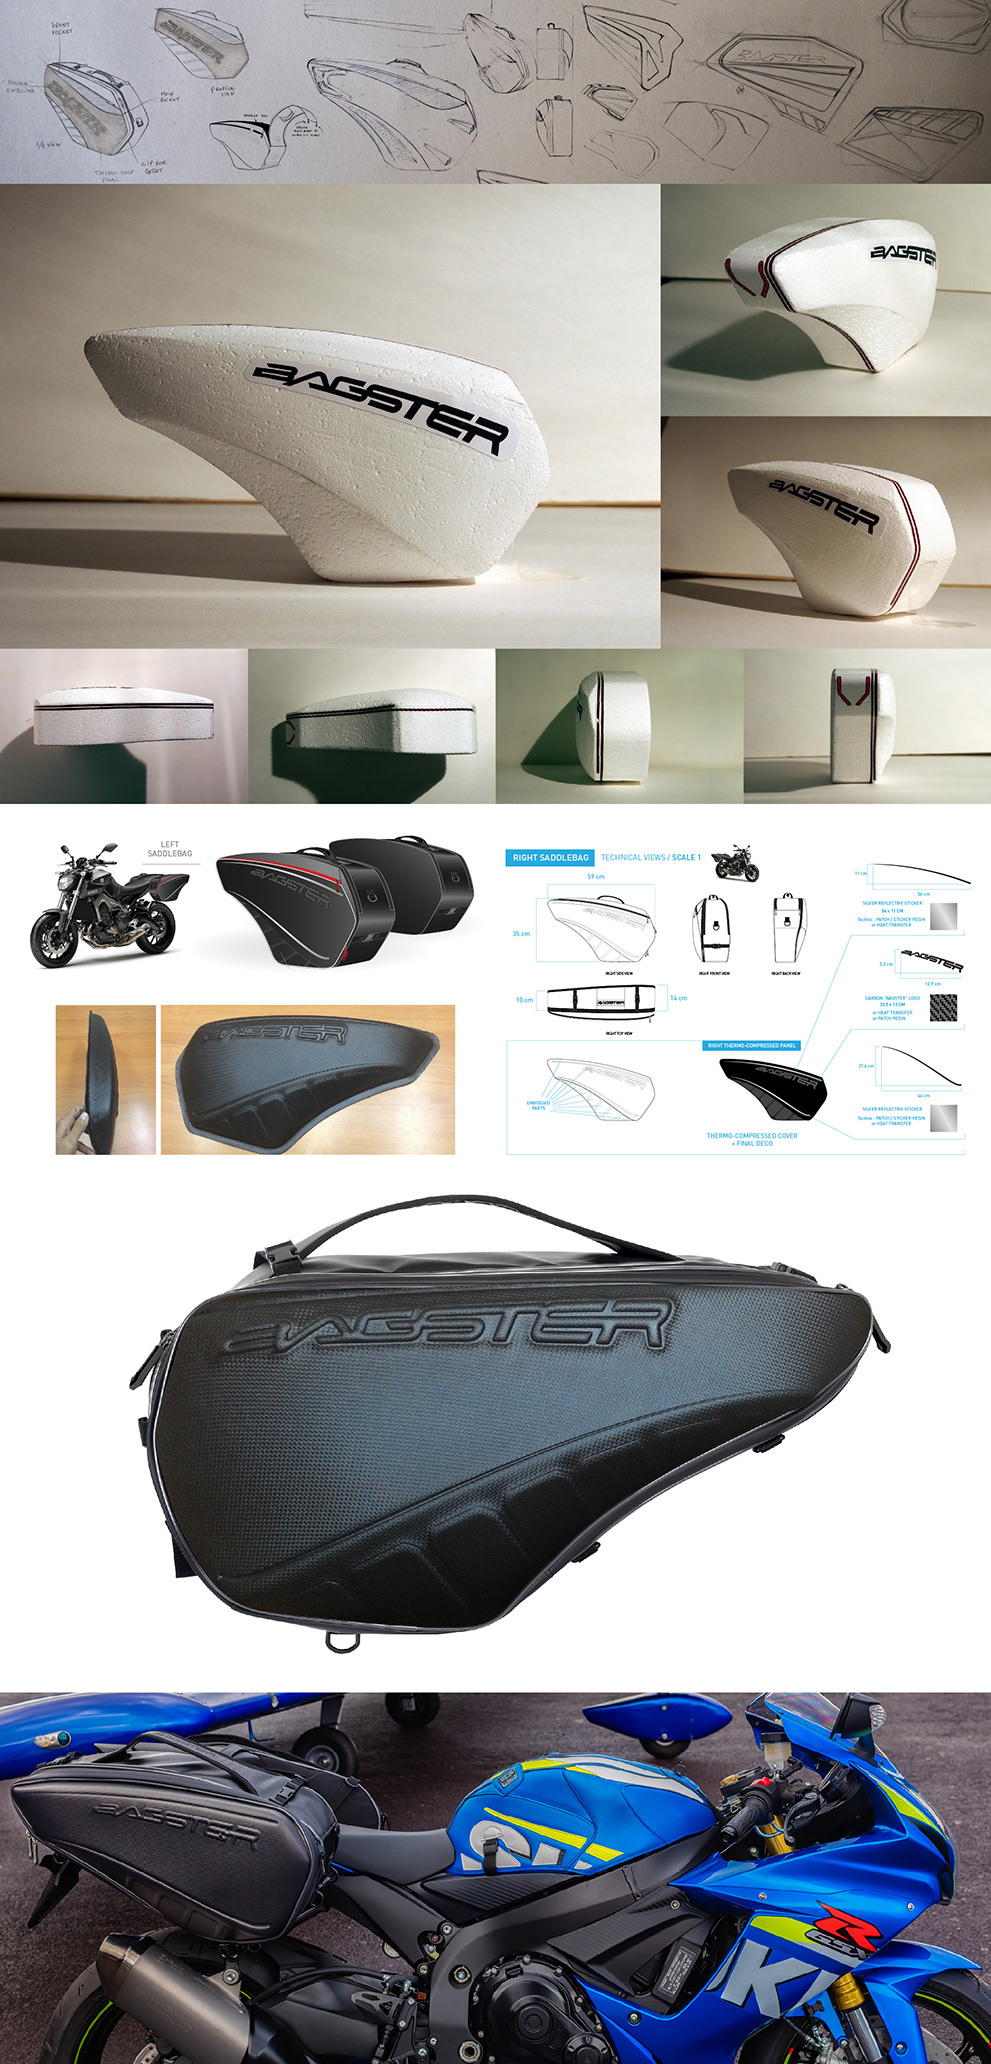 saddle bag design conception product design  thermocompressed foam model Racing graphic design  gusset motorcycle luggage